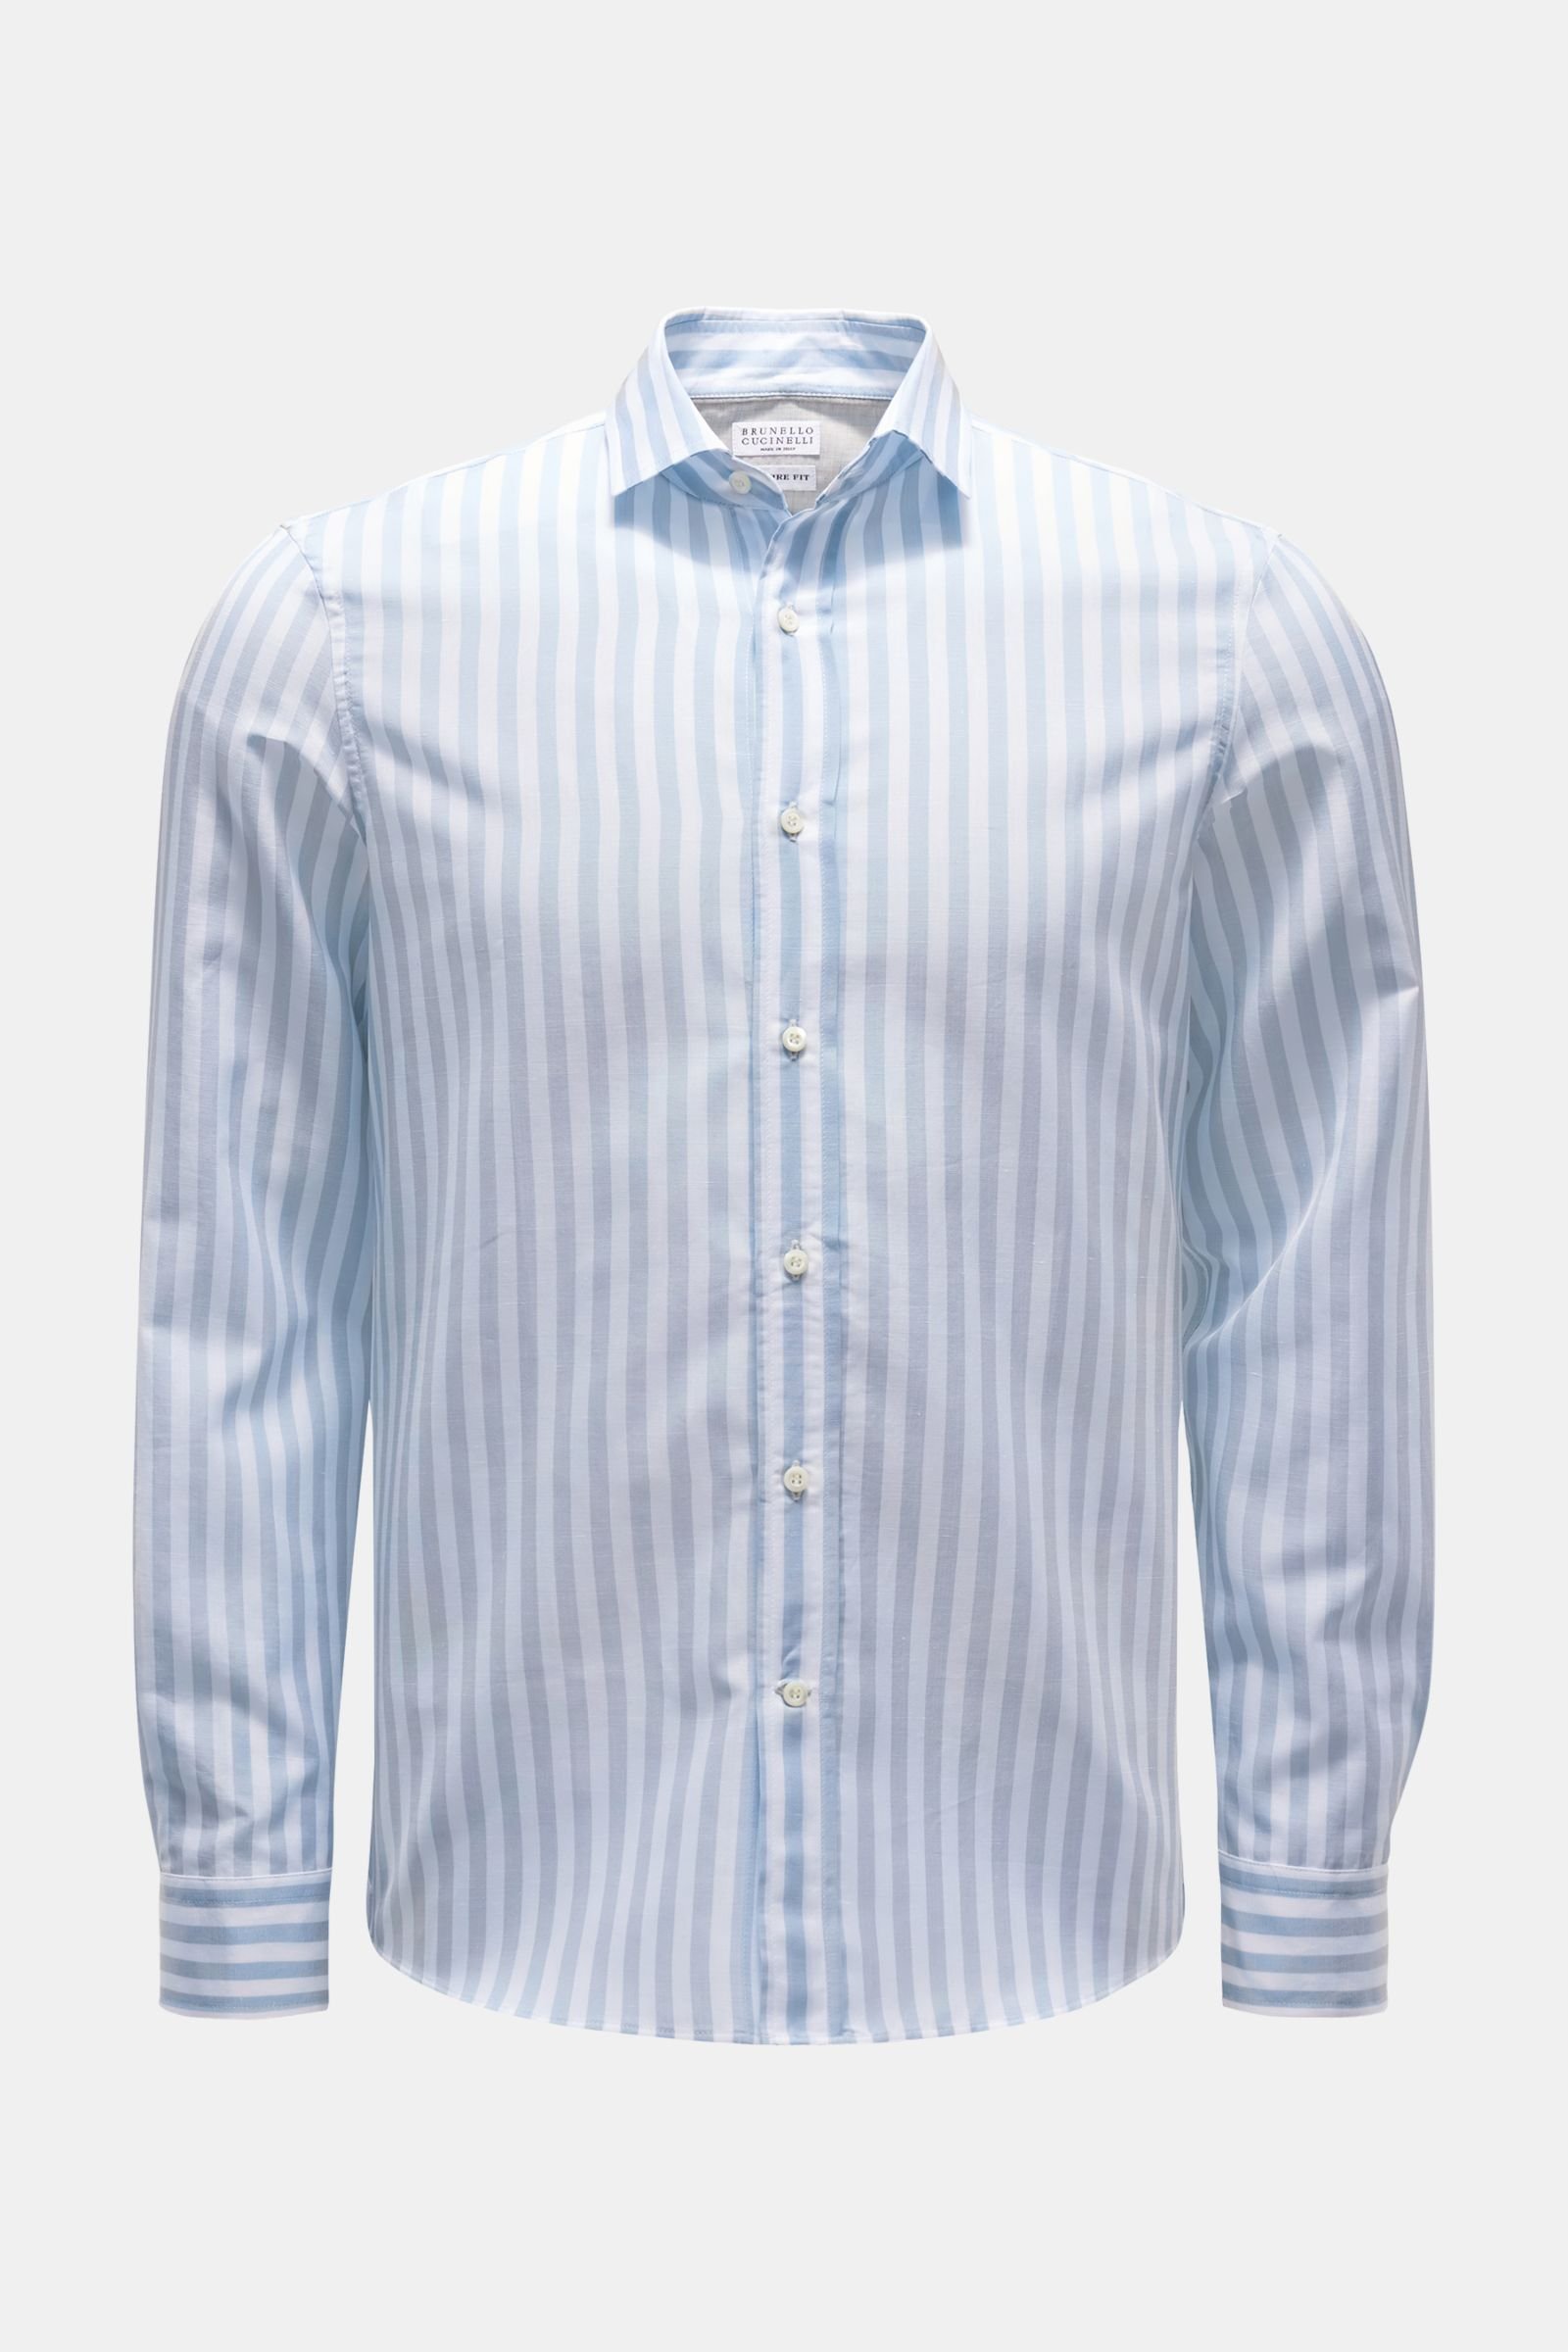 Casual shirt 'Leisure Fit' narrow collar light blue/white striped